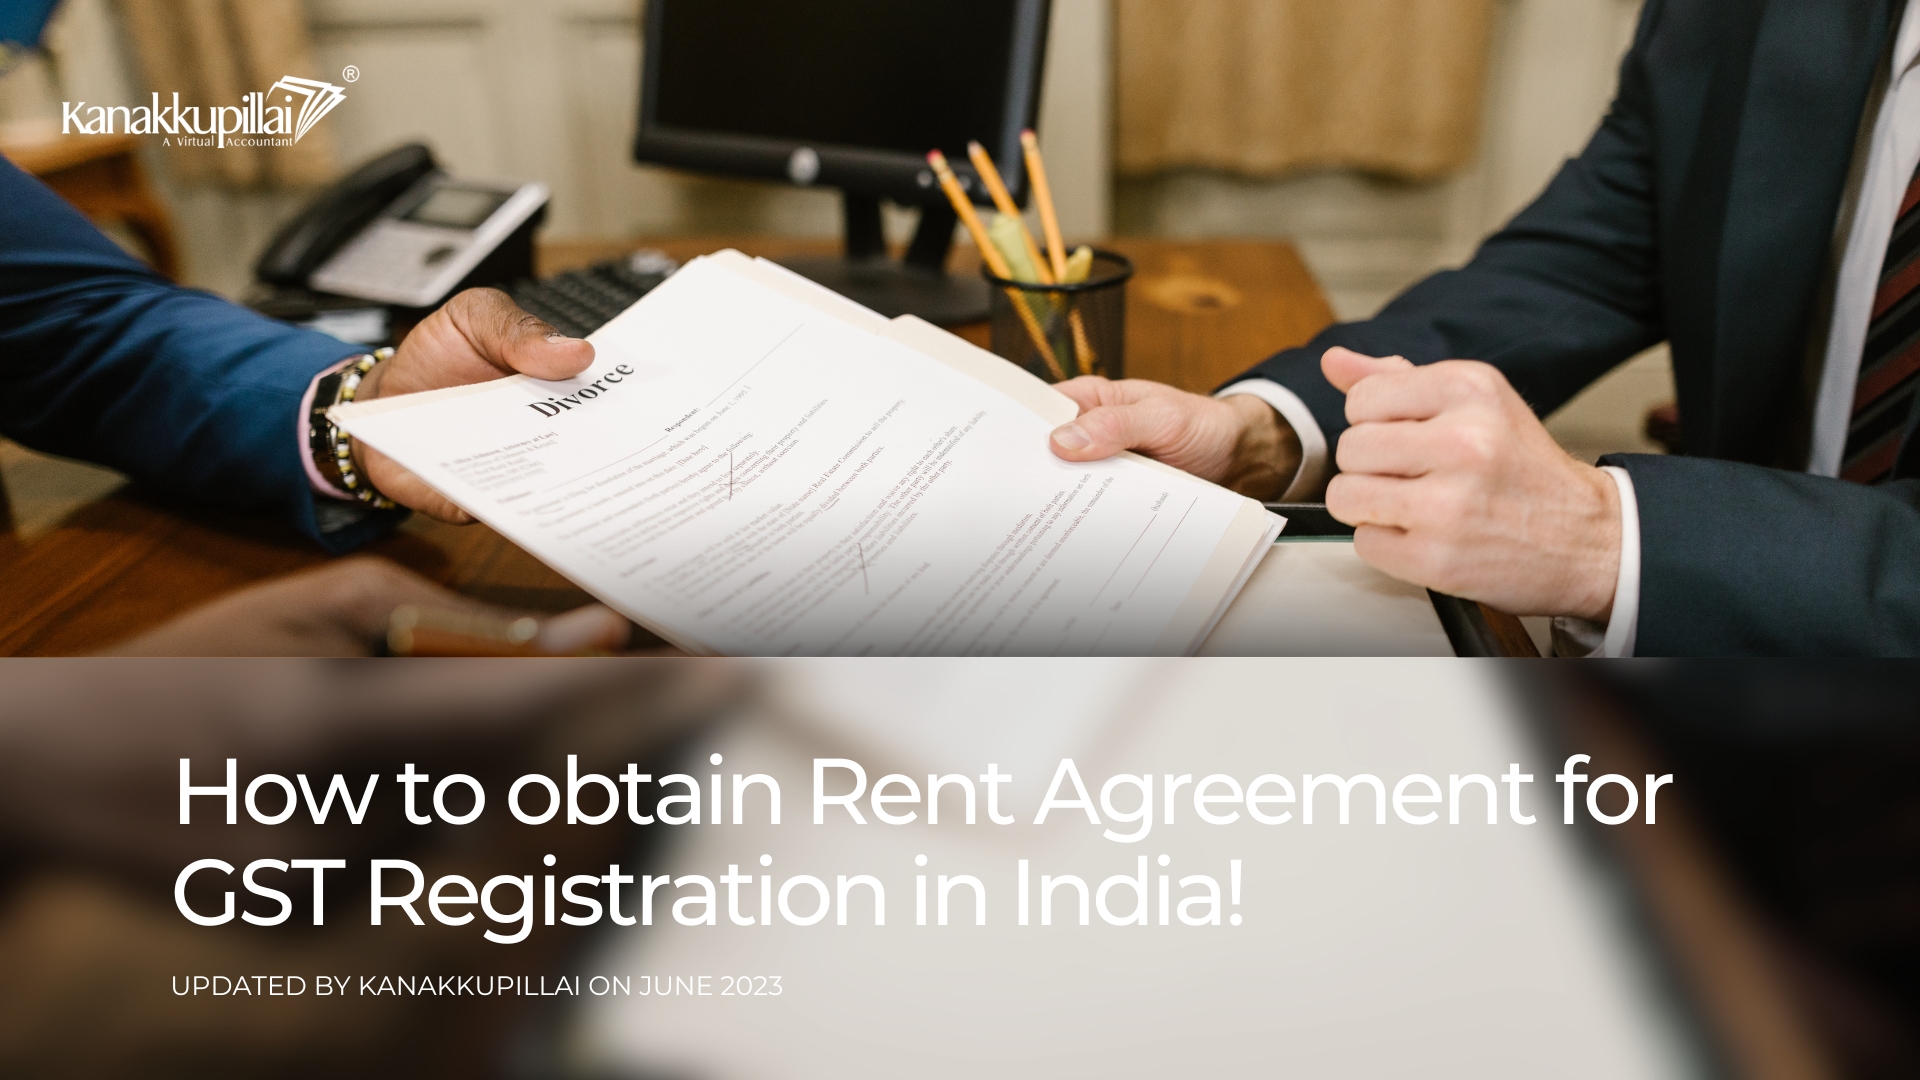 How to obtain Rent Agreement for GST Registration in India